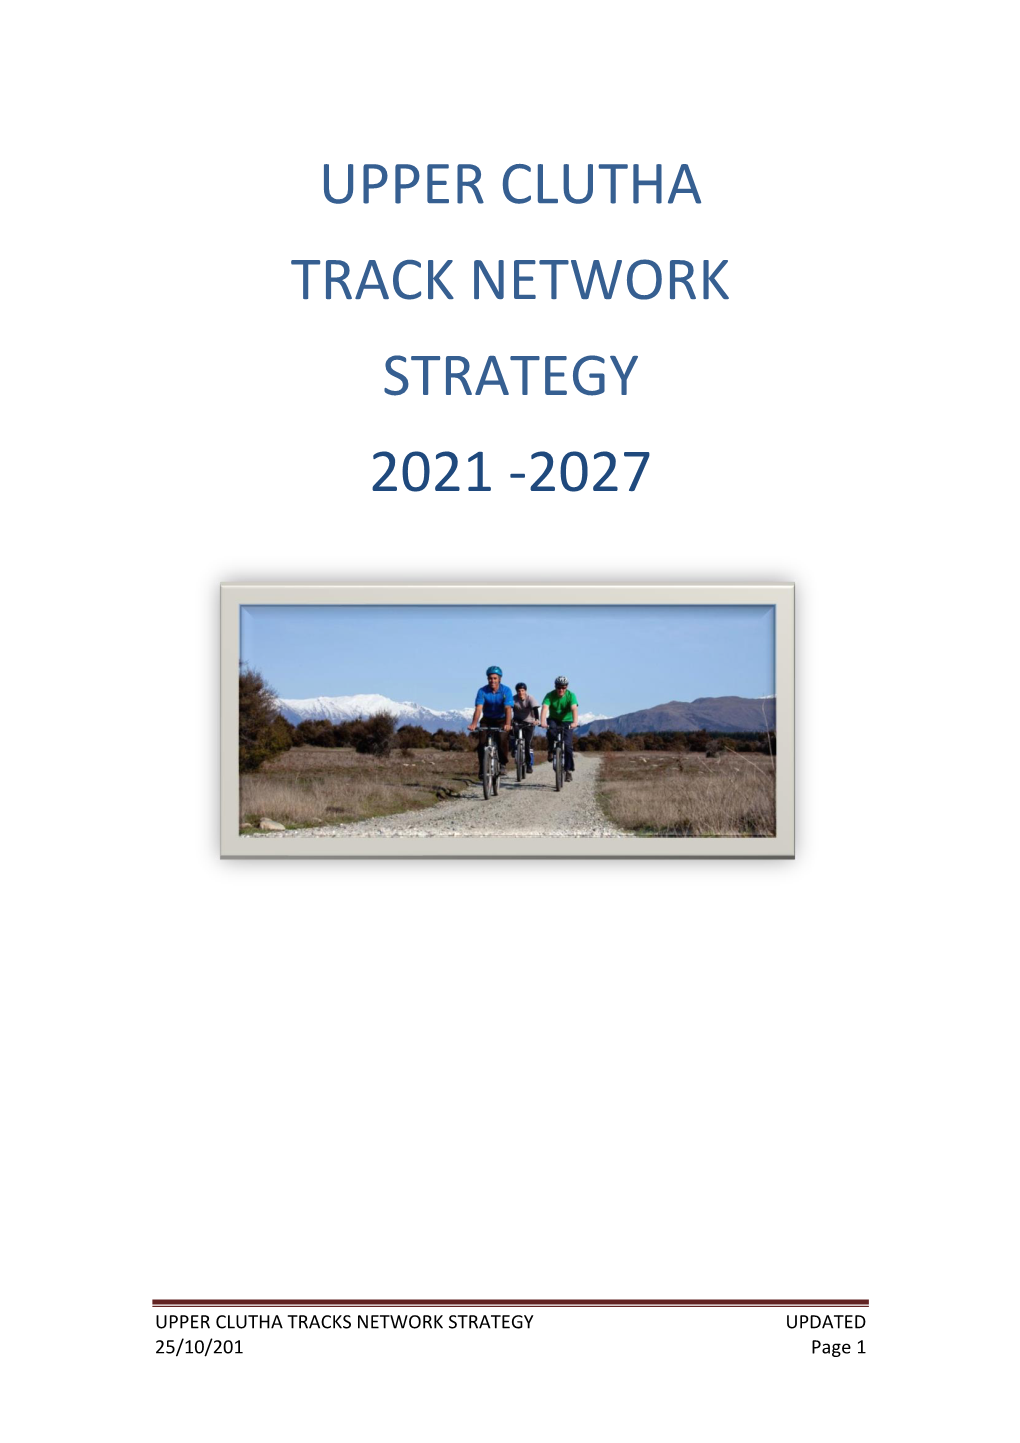 Upper Clutha Track Network Strategy 2021 -2027